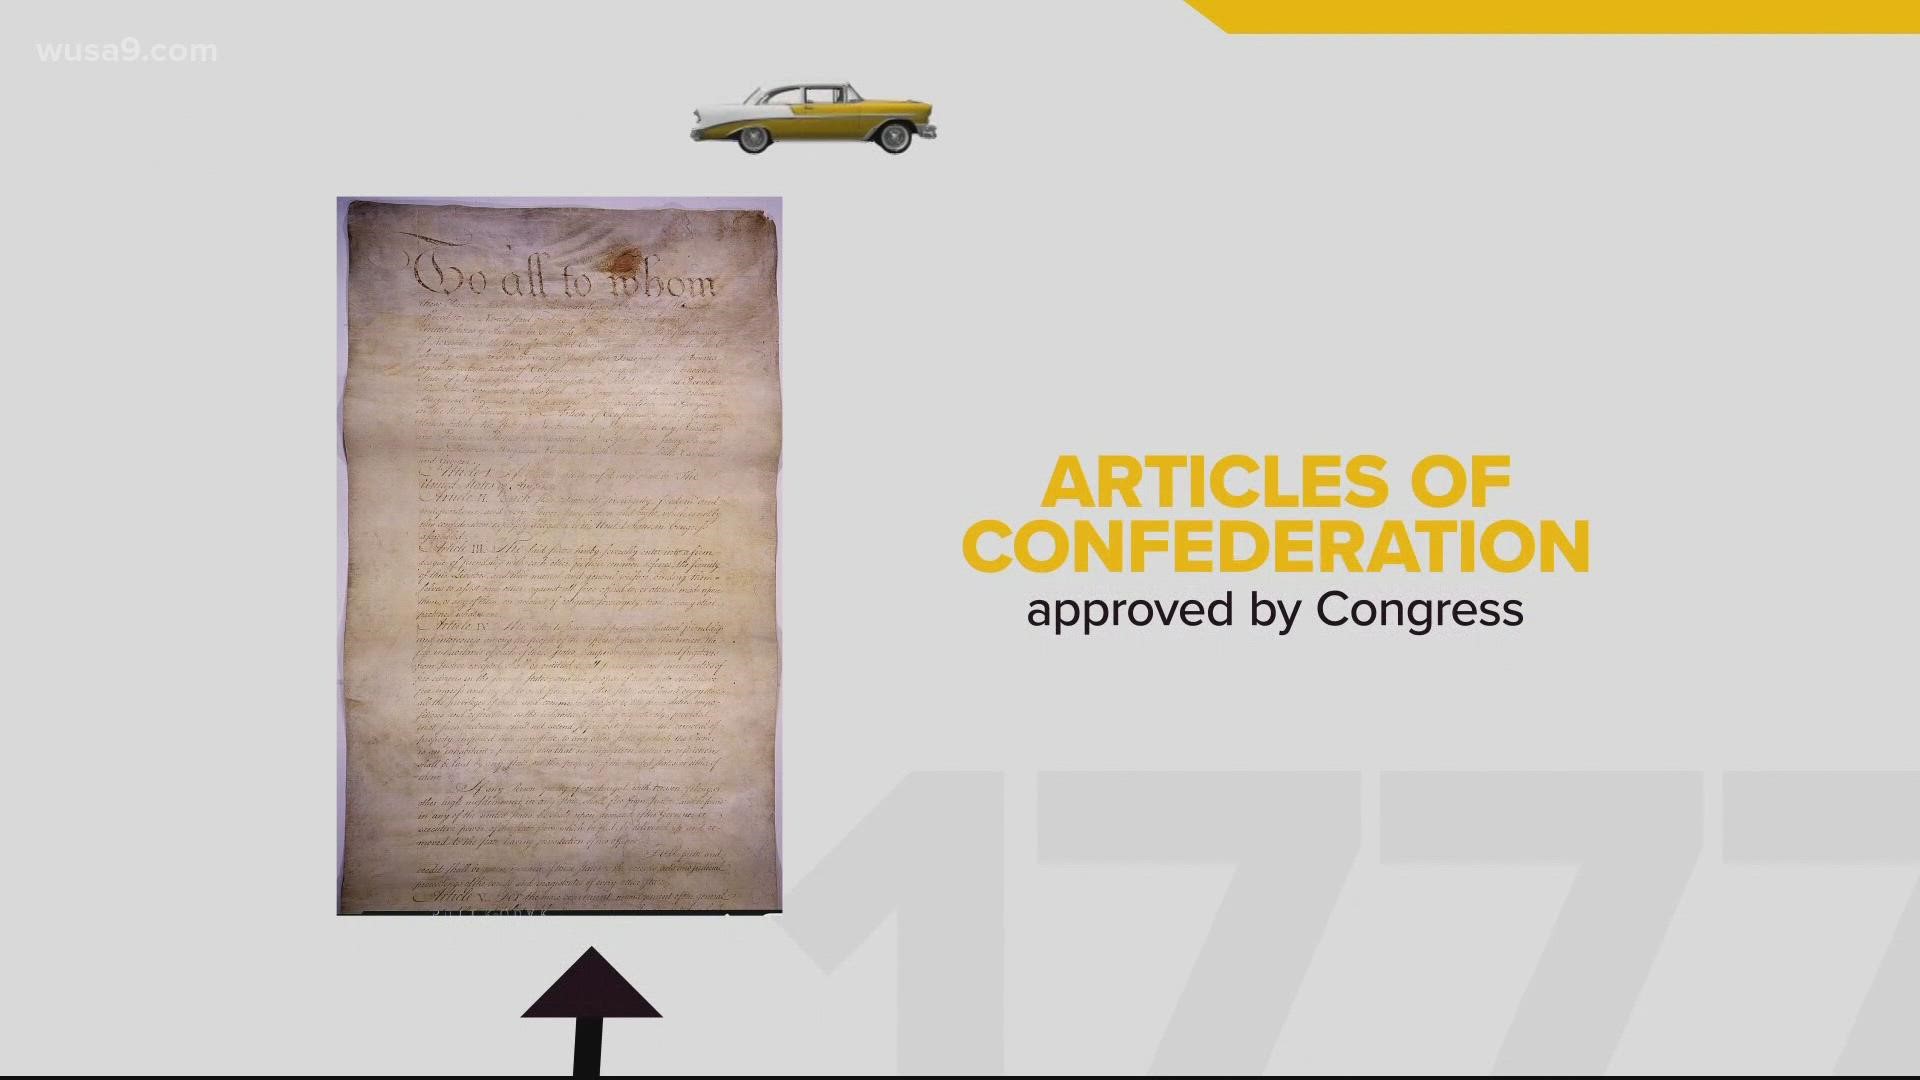 Our nation's first Constitution was approved on Nov. 15, 1777 by the Second Continental Congress after a year of debate and negotiation among the first 13 states.